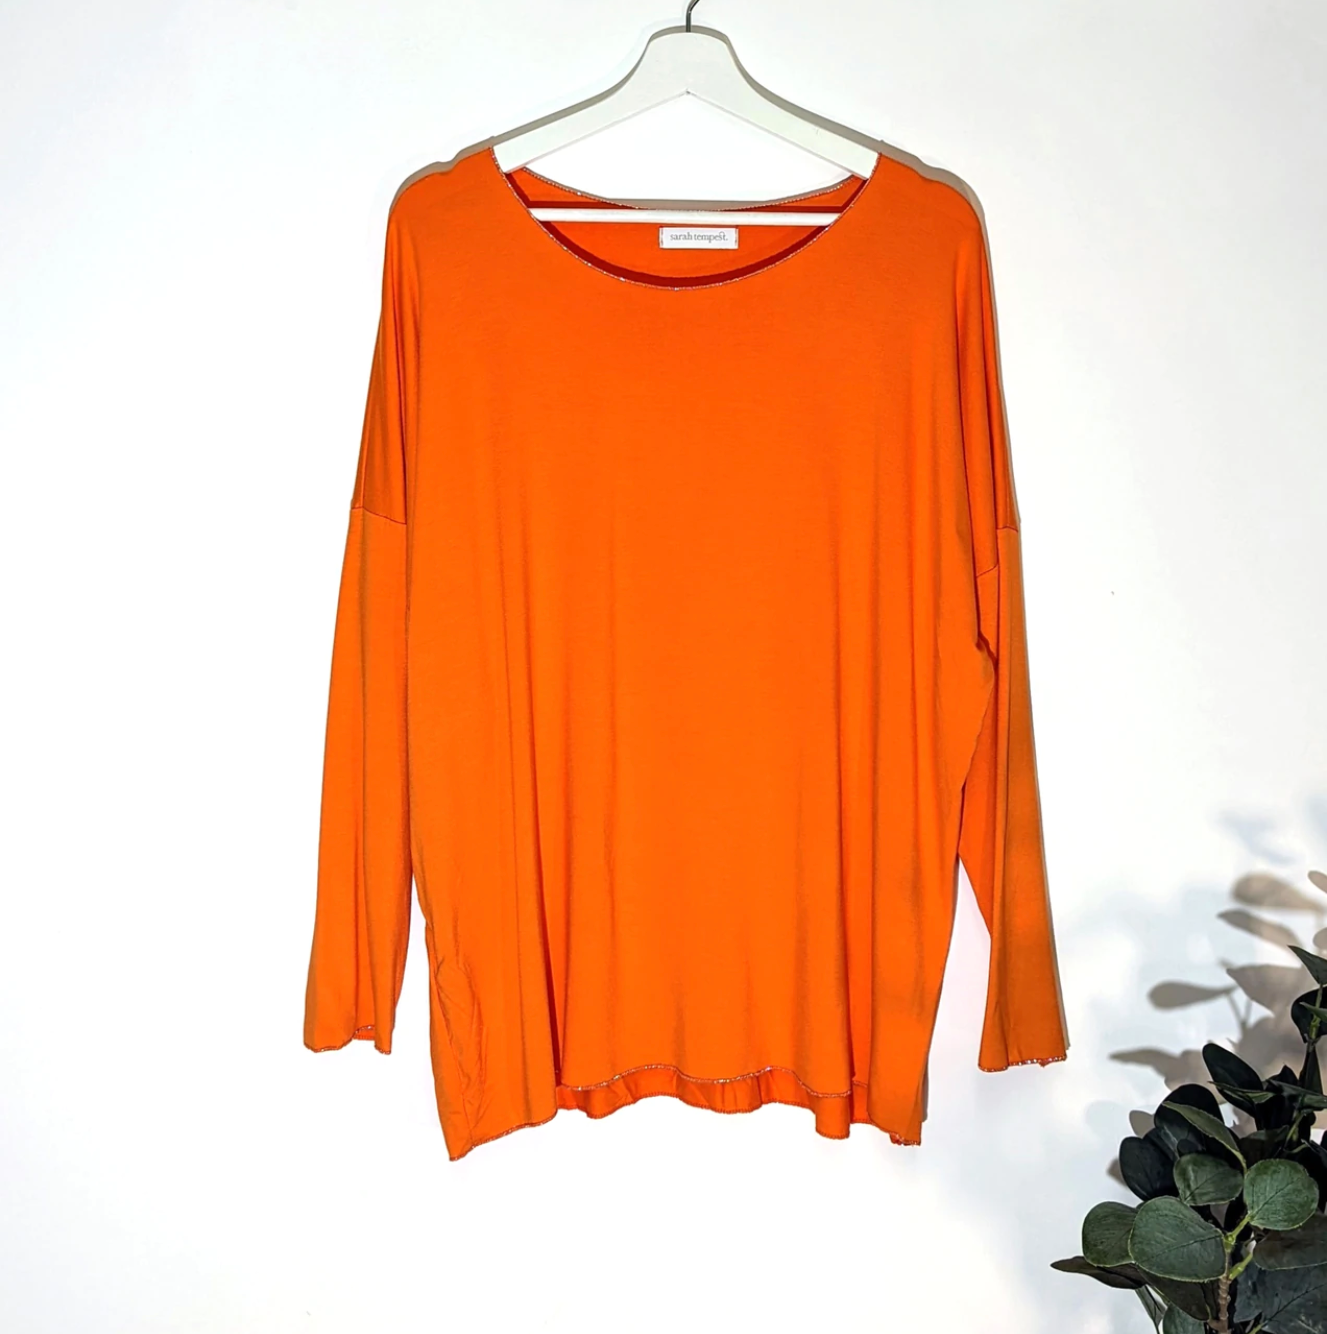 Orange super soft long sleeve cotton top with silver trim